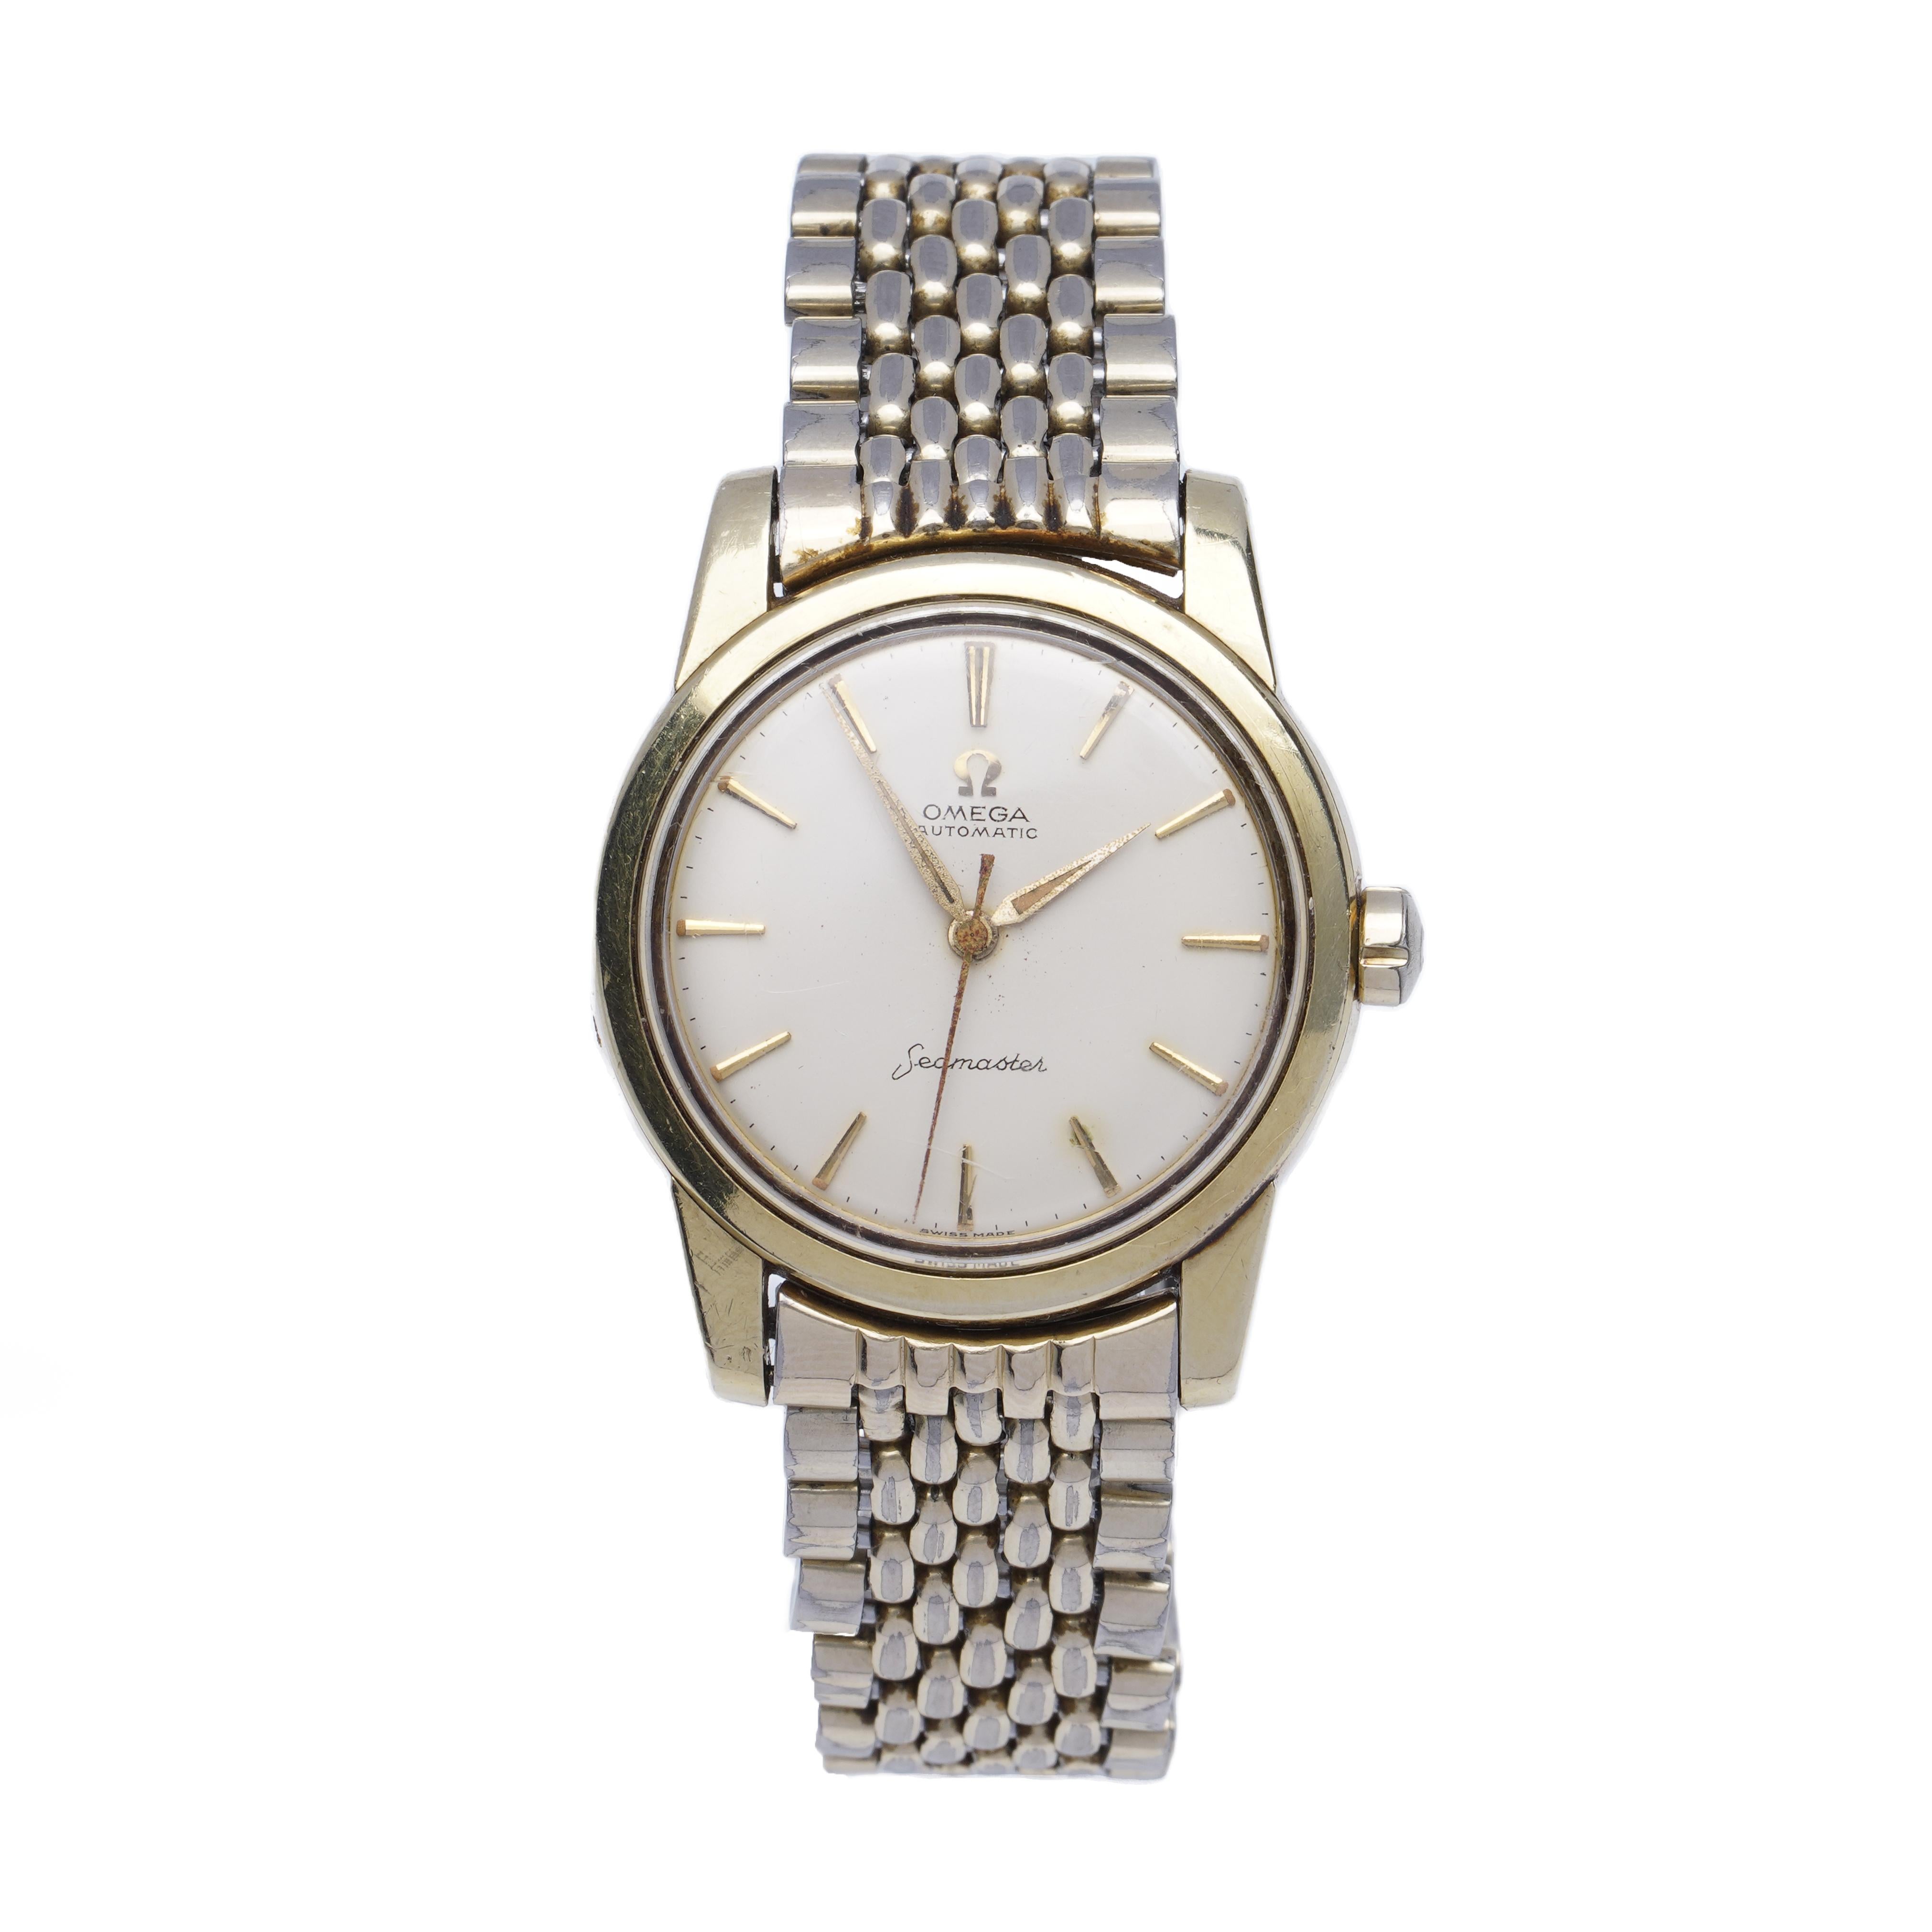 Omega Seamaster Automatic men's wristwatch, 1960's 

Case Diameter: 34 mm
Movement: Mechanical Automatic 
Case Material: Gold-plated 
Watchband Material: Stainless steel 
Dial colour: Cream coloured with golden indices 
Display Type: Analogue
Glass: